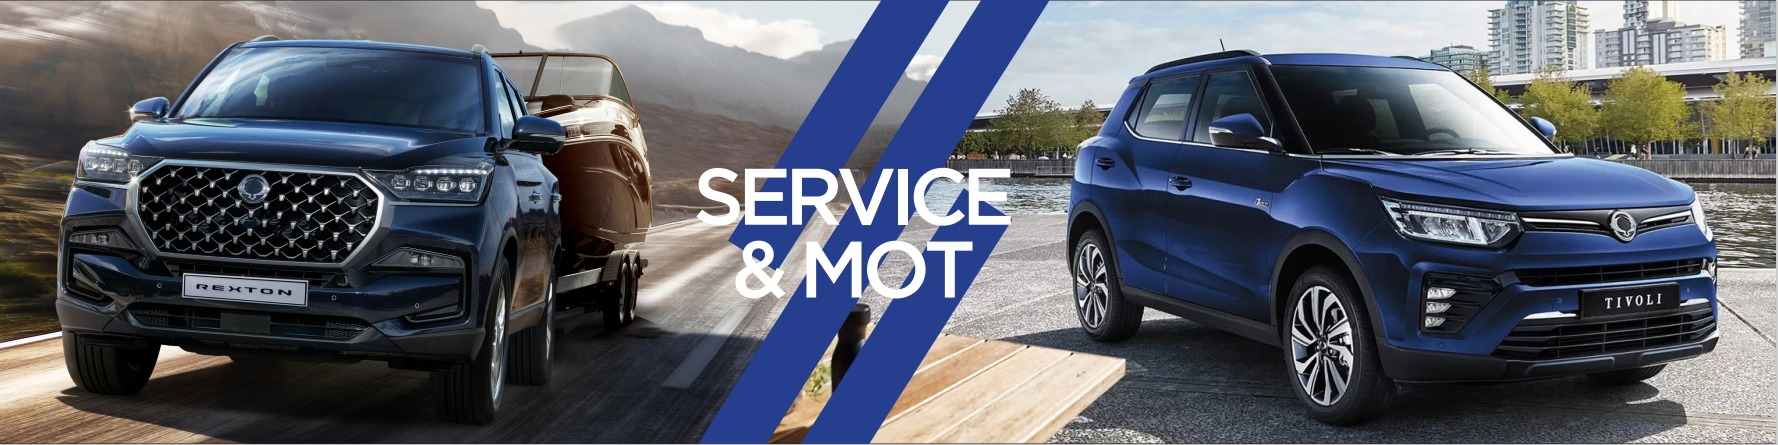 Book an MOT or Service at AutoVillage KGM